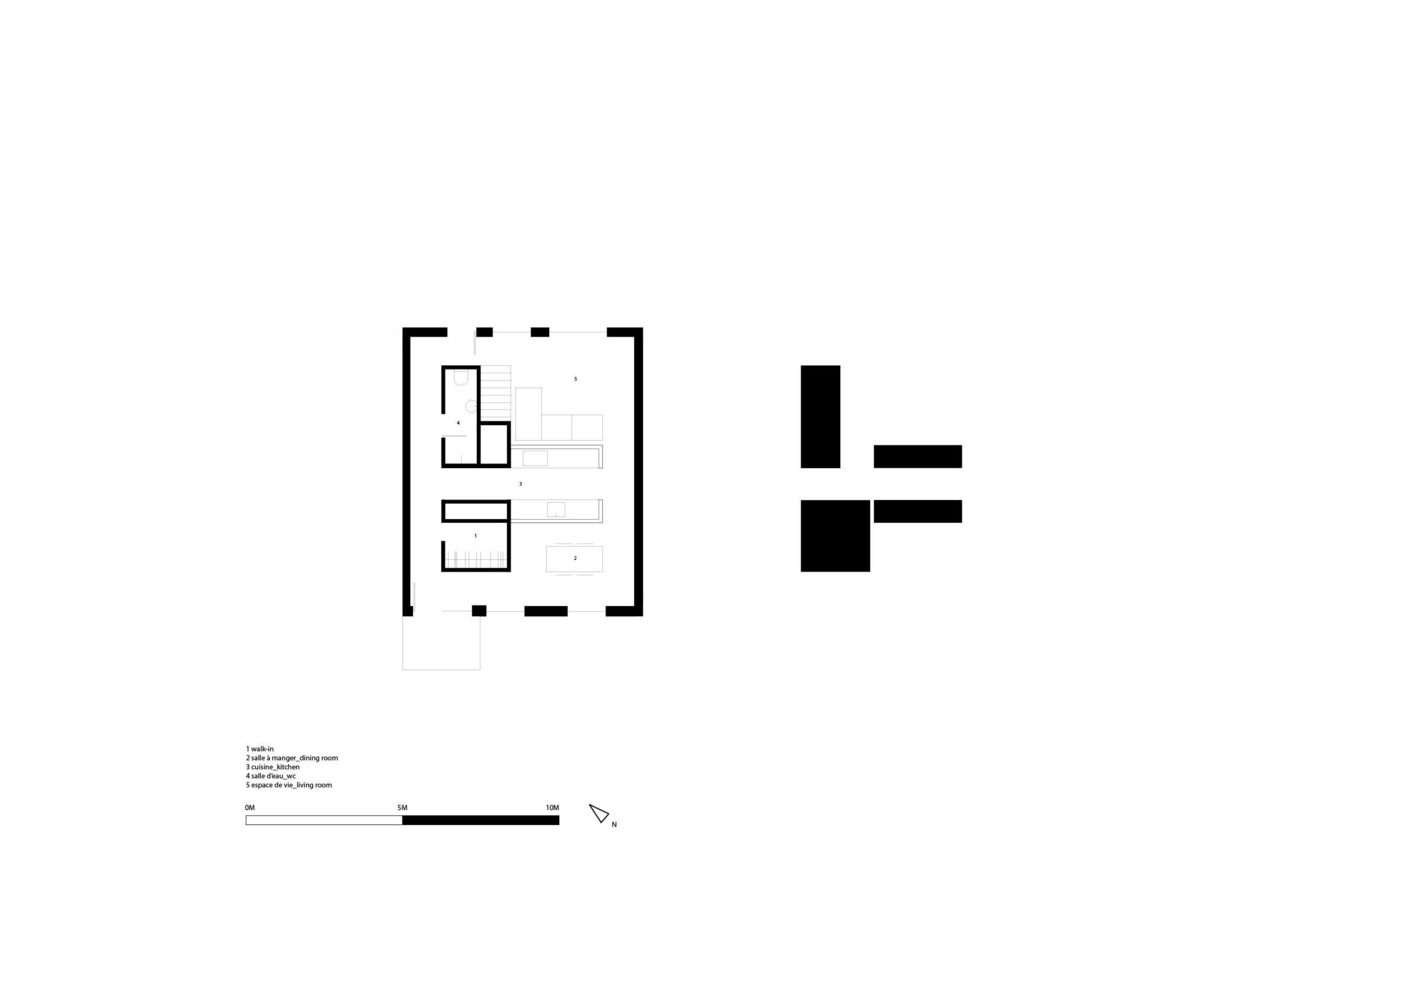 Second Floor Plan of “MB House”